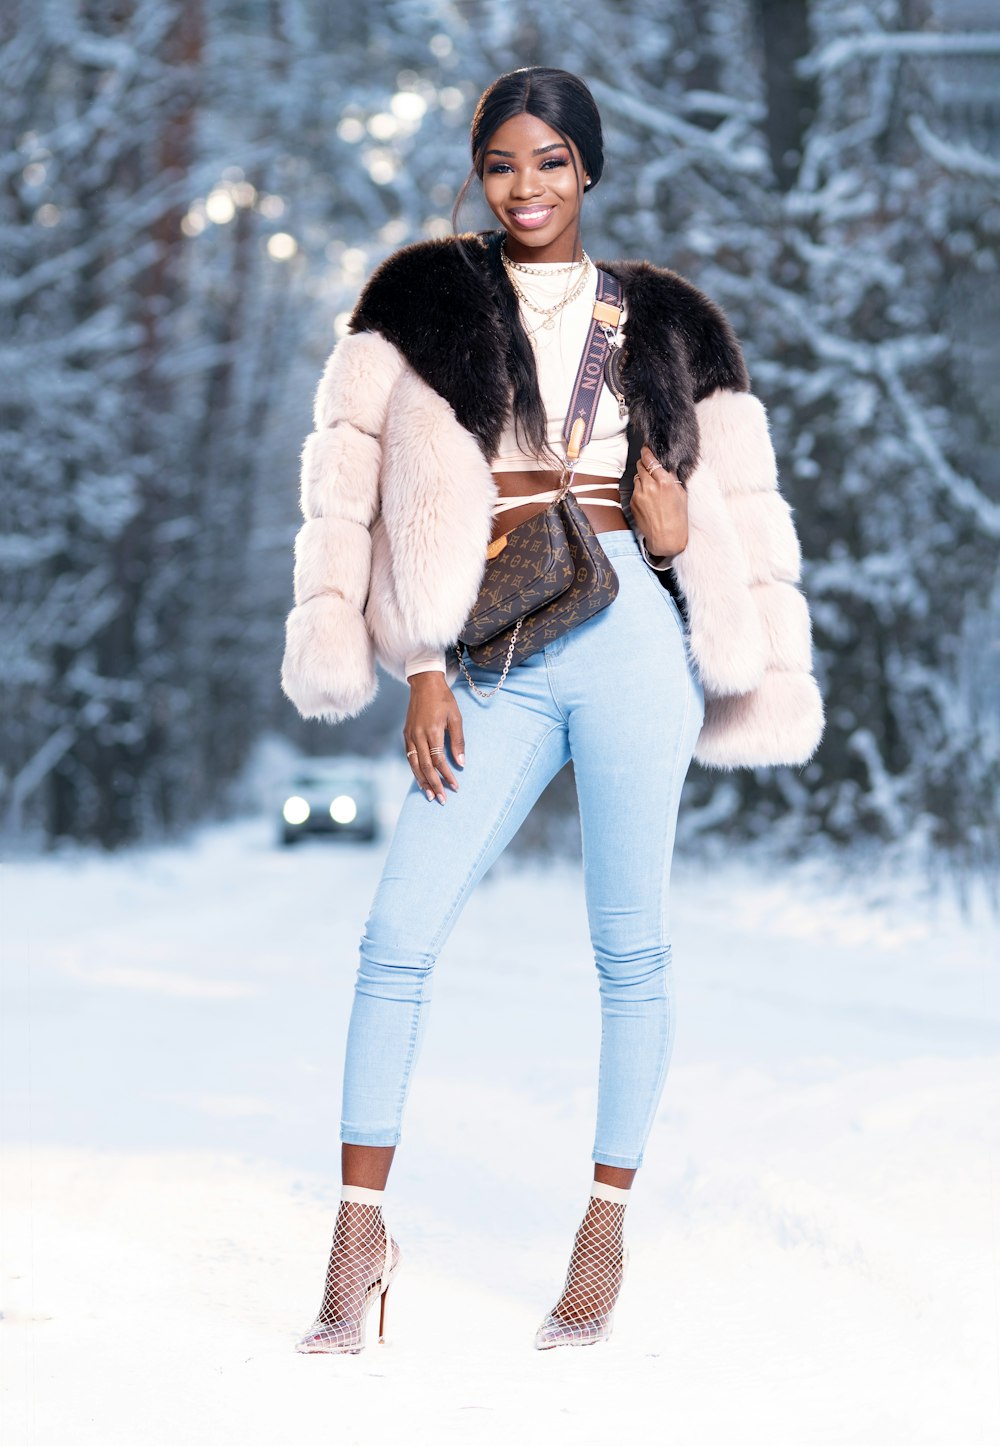 woman in white fur jacket and blue denim jeans standing on snow covered ground during daytime